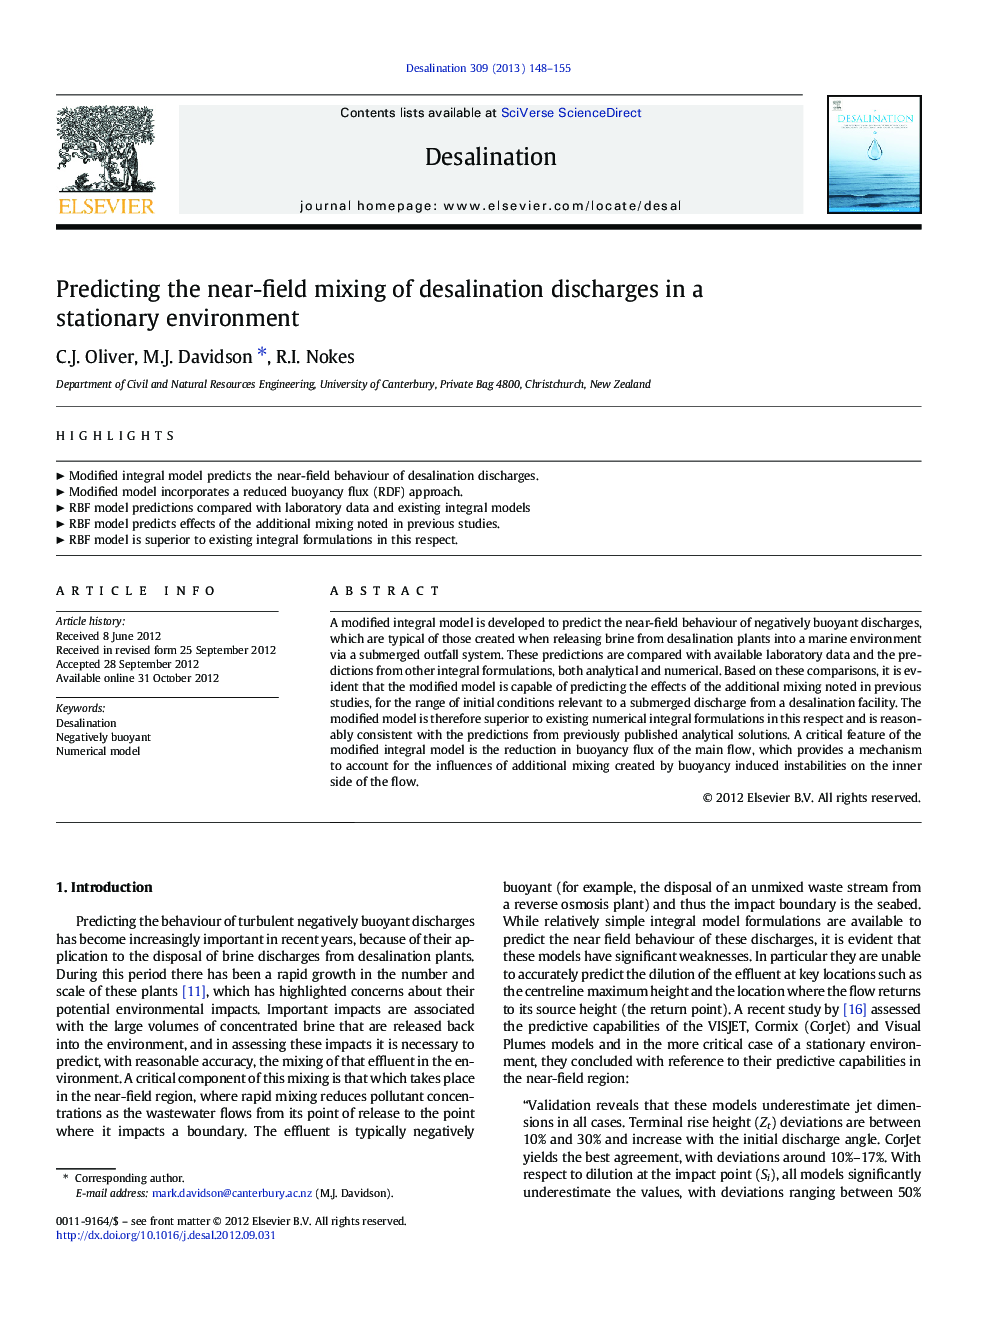 Predicting the near-field mixing of desalination discharges in a stationary environment